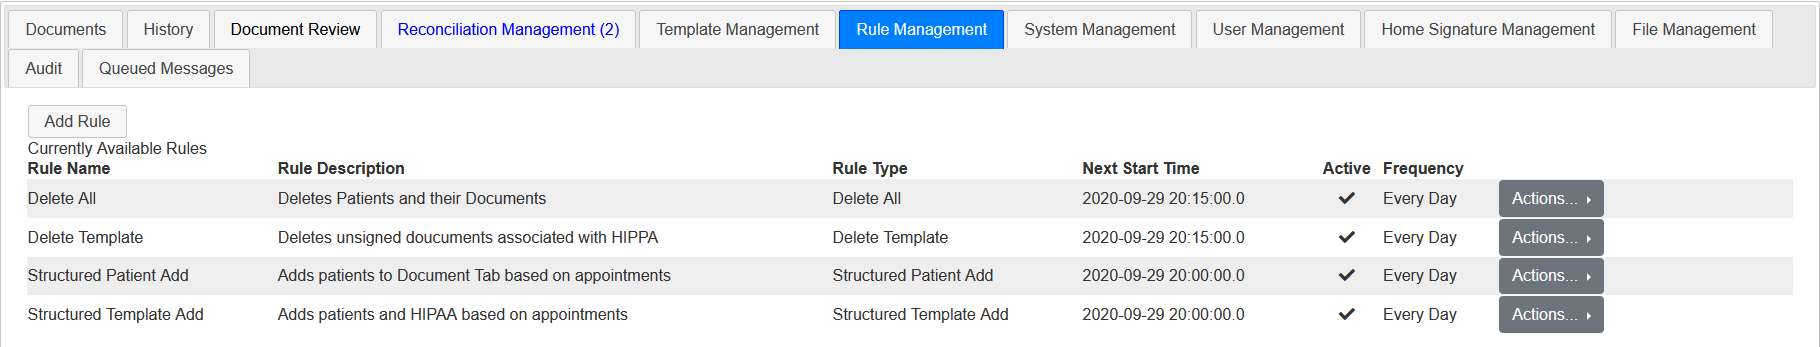 Screenshot Following Addition of Structured Template Add Rule